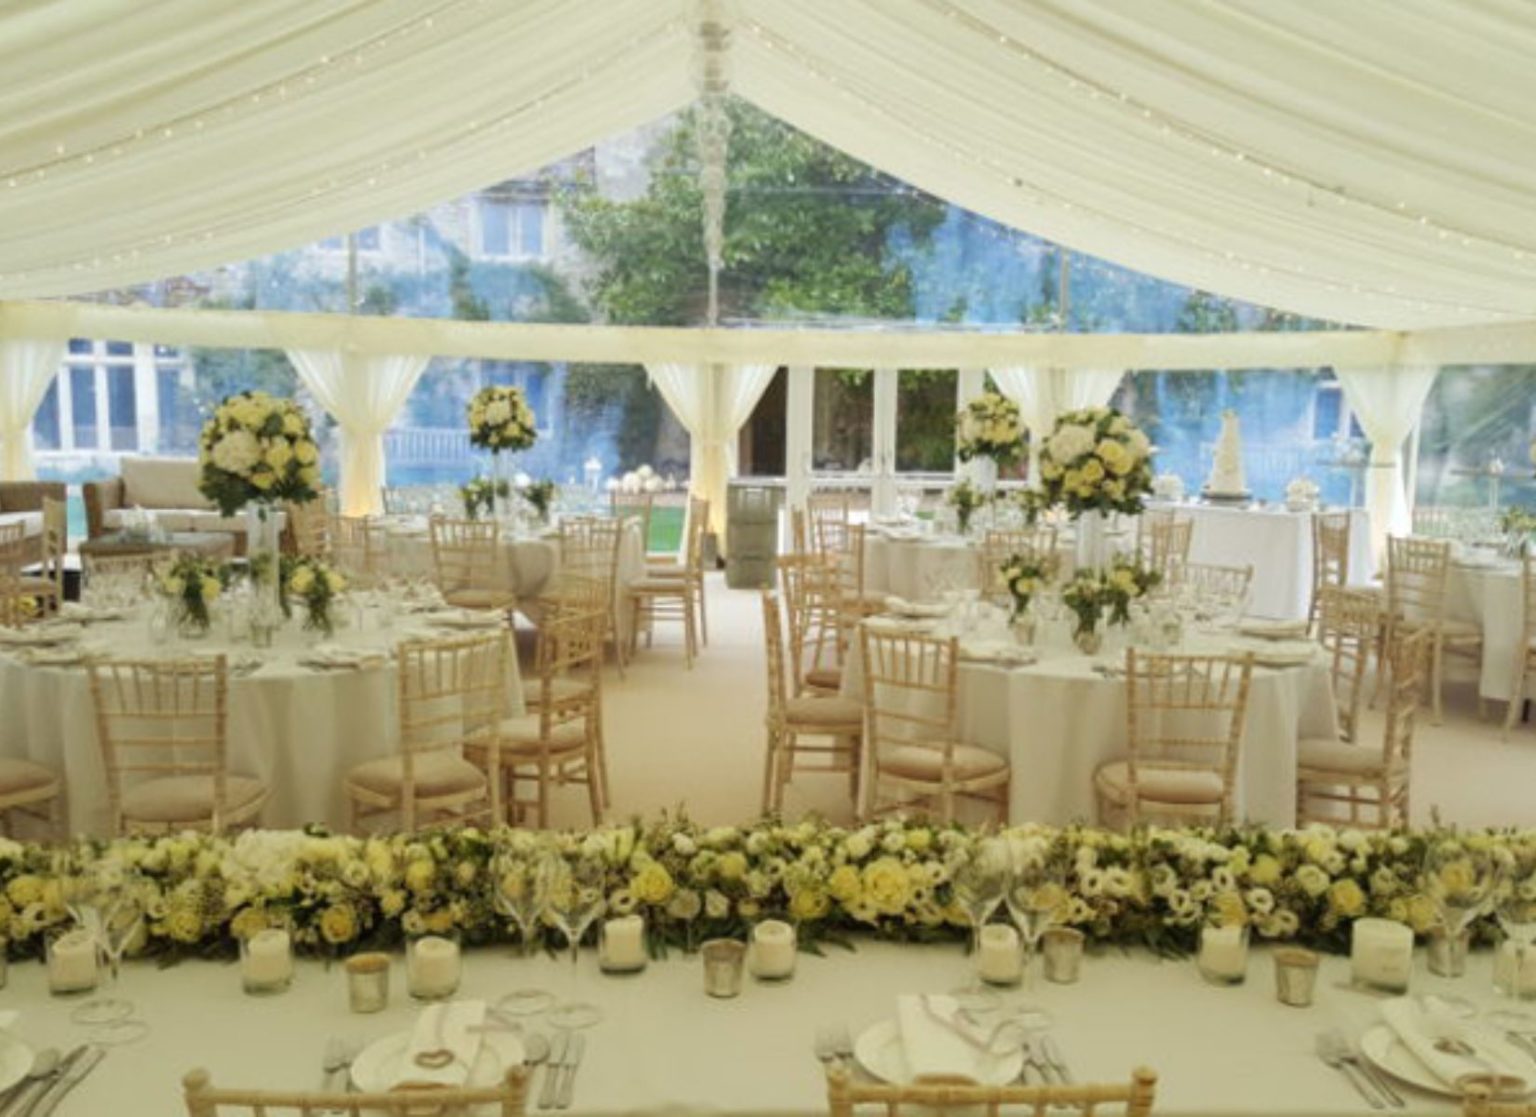 Clearspan Gable End Wedding Marquee with Wooden Chivali Chairs